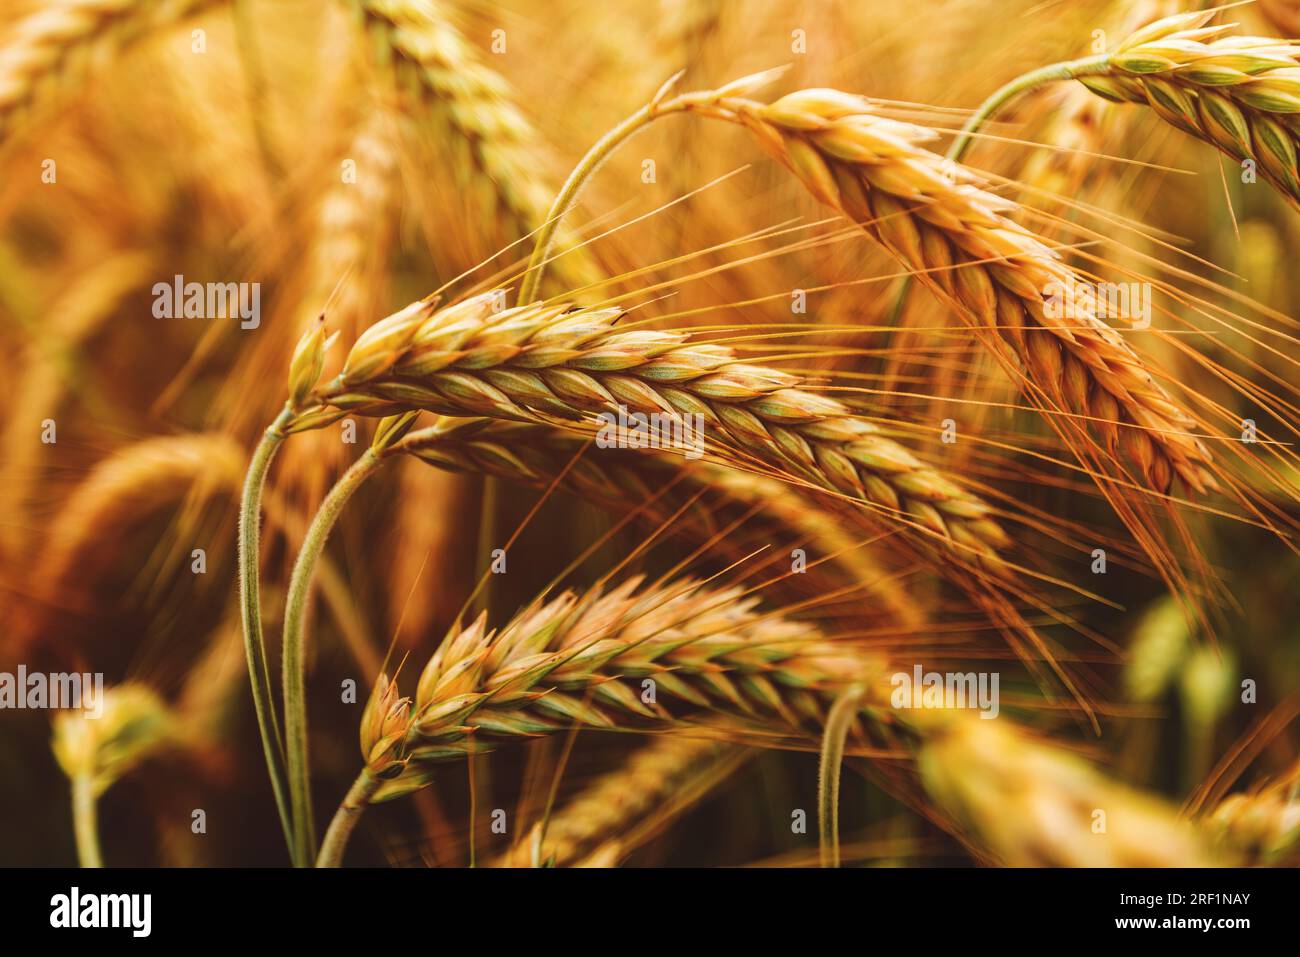 Ripening ears of common wheat (Triticum aestivum) cultivated crops in field, selective focus Stock Photo